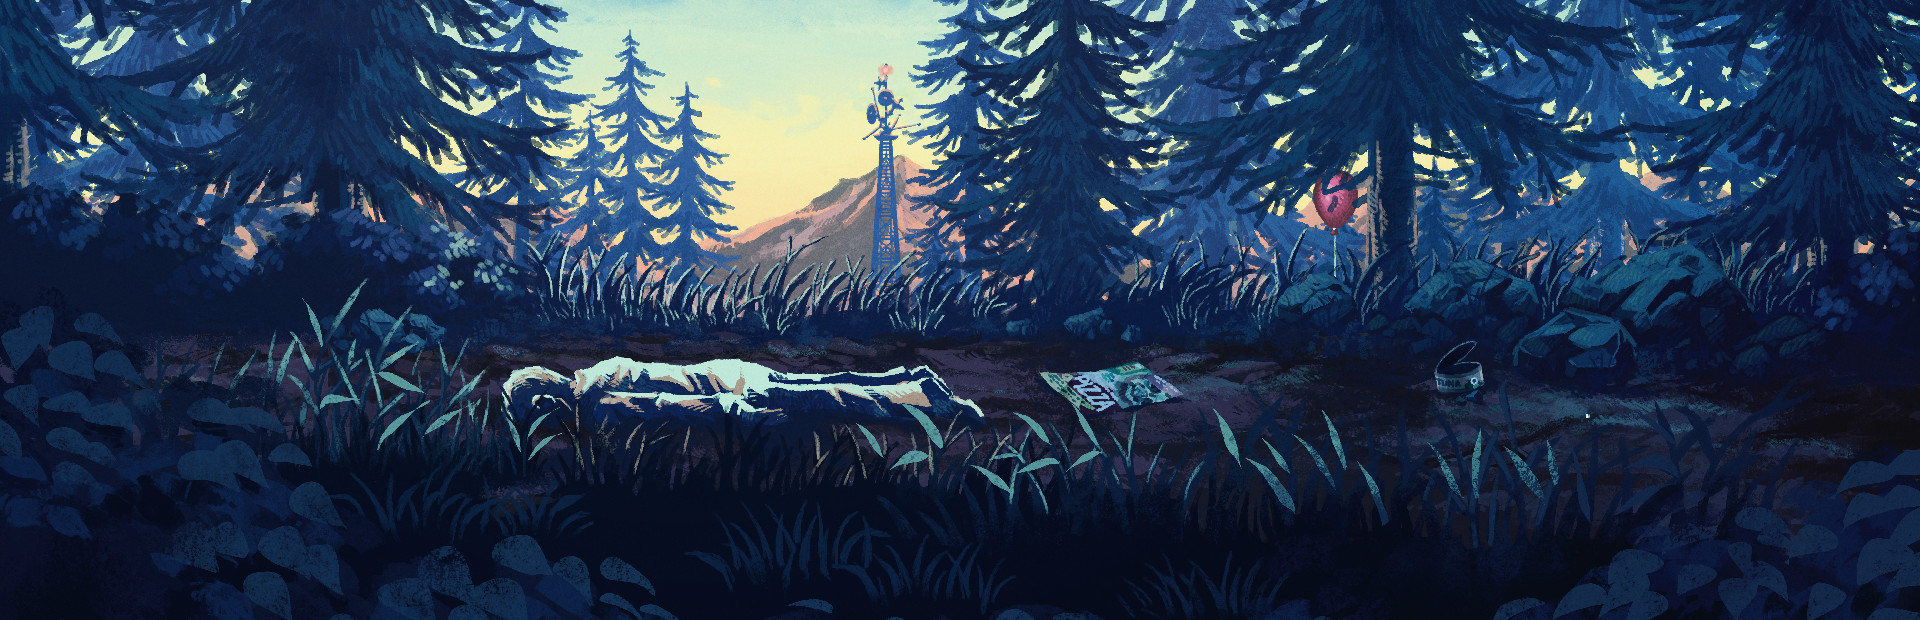 Thimbleweed Park™ cover image